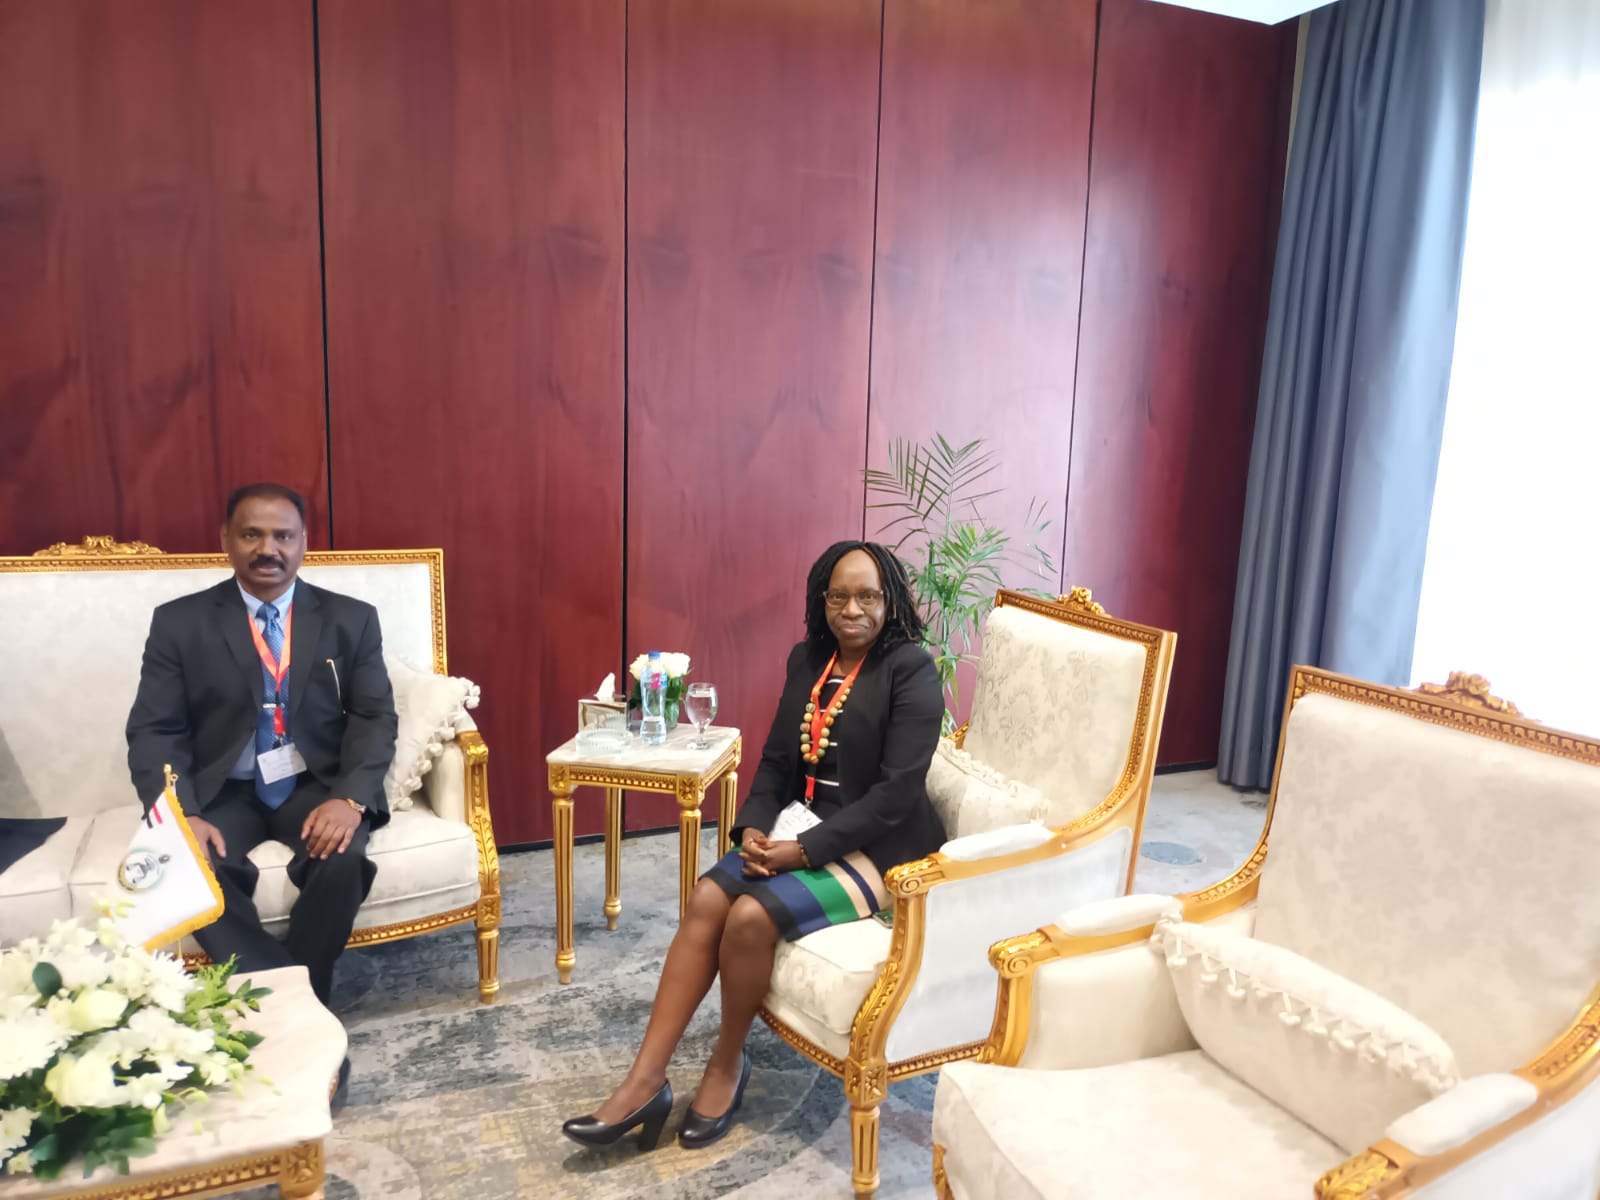 CAG of India, Sh. Girish Chandra Murmu in conversation with Auditor General of the Office of the Auditor General of Kenya, Ms. Nancy Gathungu on the sidelines of the 14th KSC SC Meeting held in Cairo, Egypt from 12th to 14th September, 2022